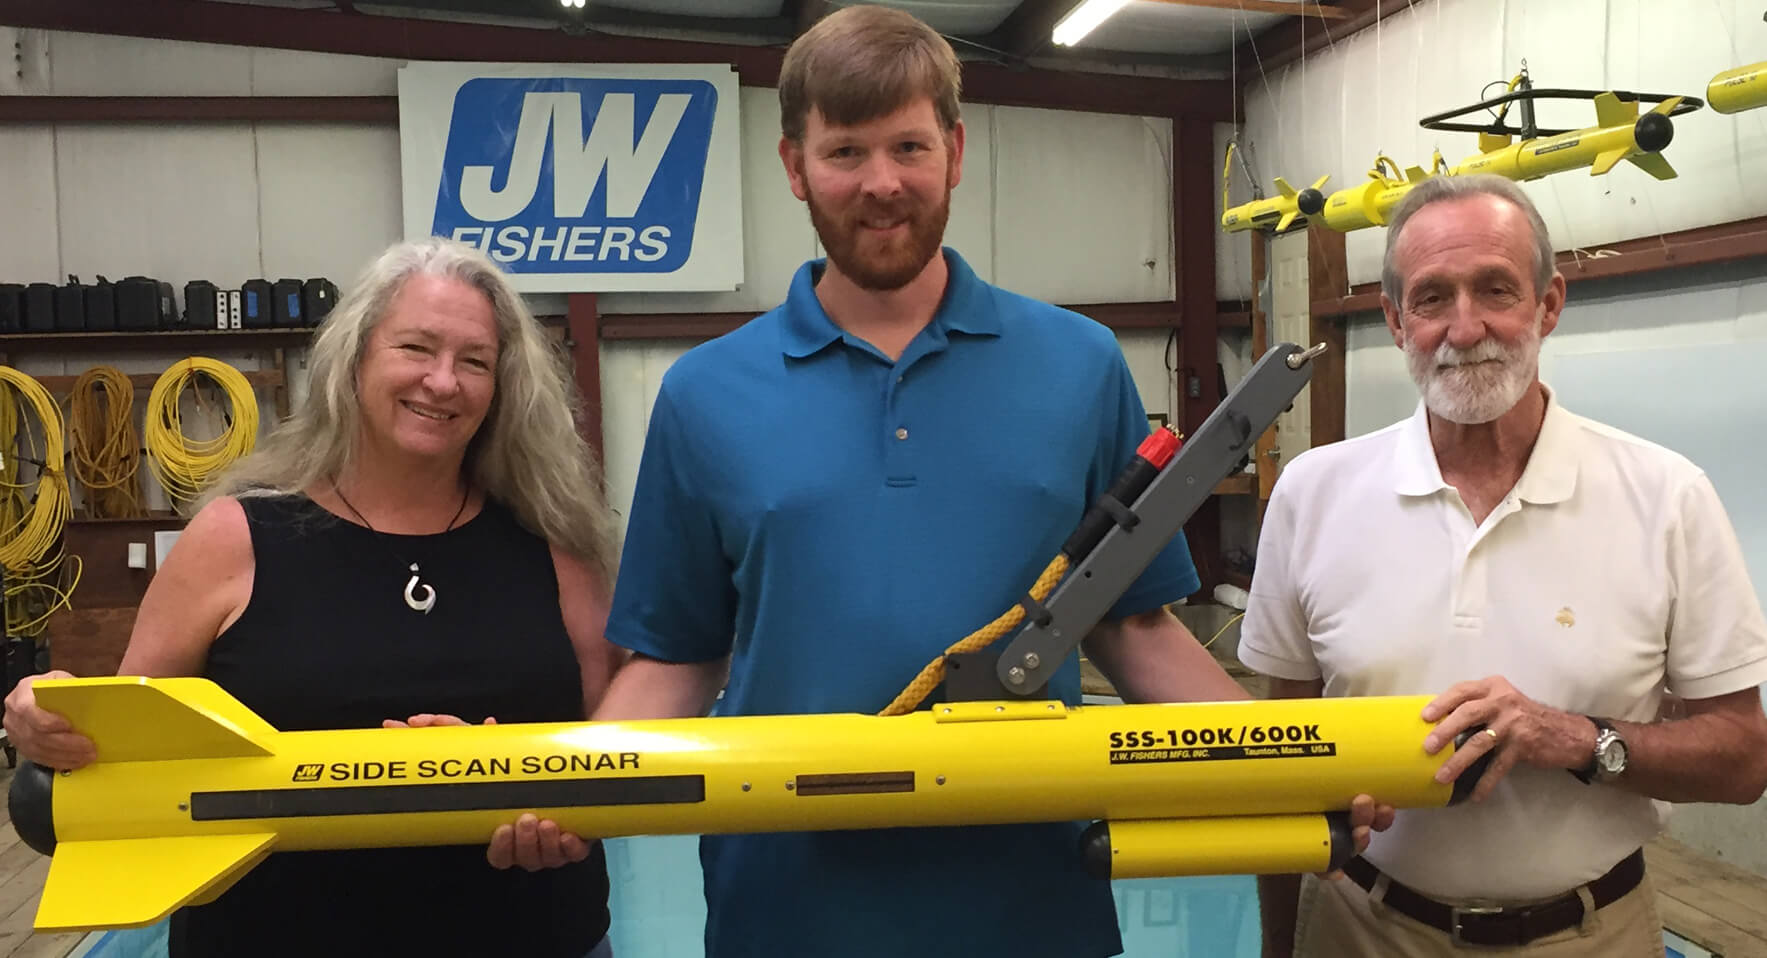 Dr. Laurel Harrison Breece with sonar tech Brian Awalt (c) and husband and colleague Dr. Bill Breece and the new JW Fishers SSS-100K/600K side scan acquired by Long Beach City College for their marine archaeology program.